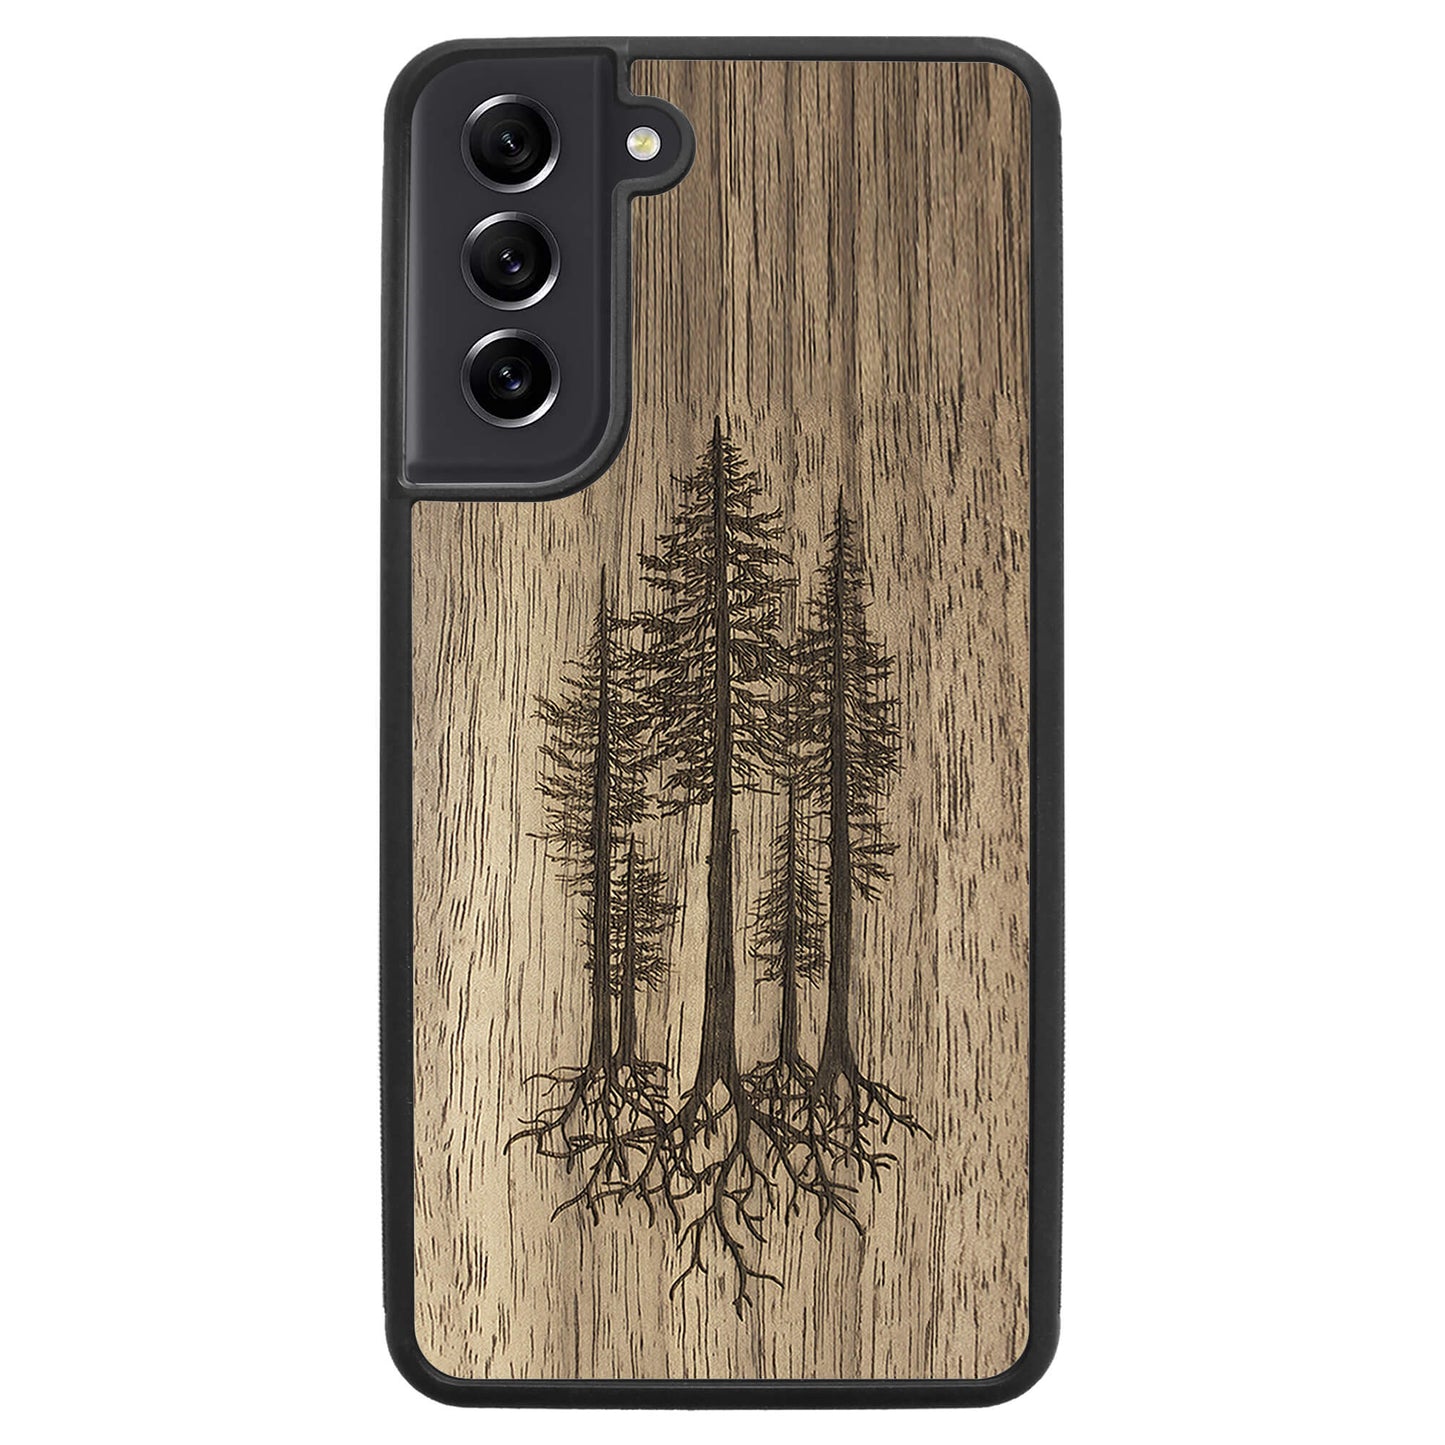 Wooden Case for Samsung Galaxy S21 FE Pines